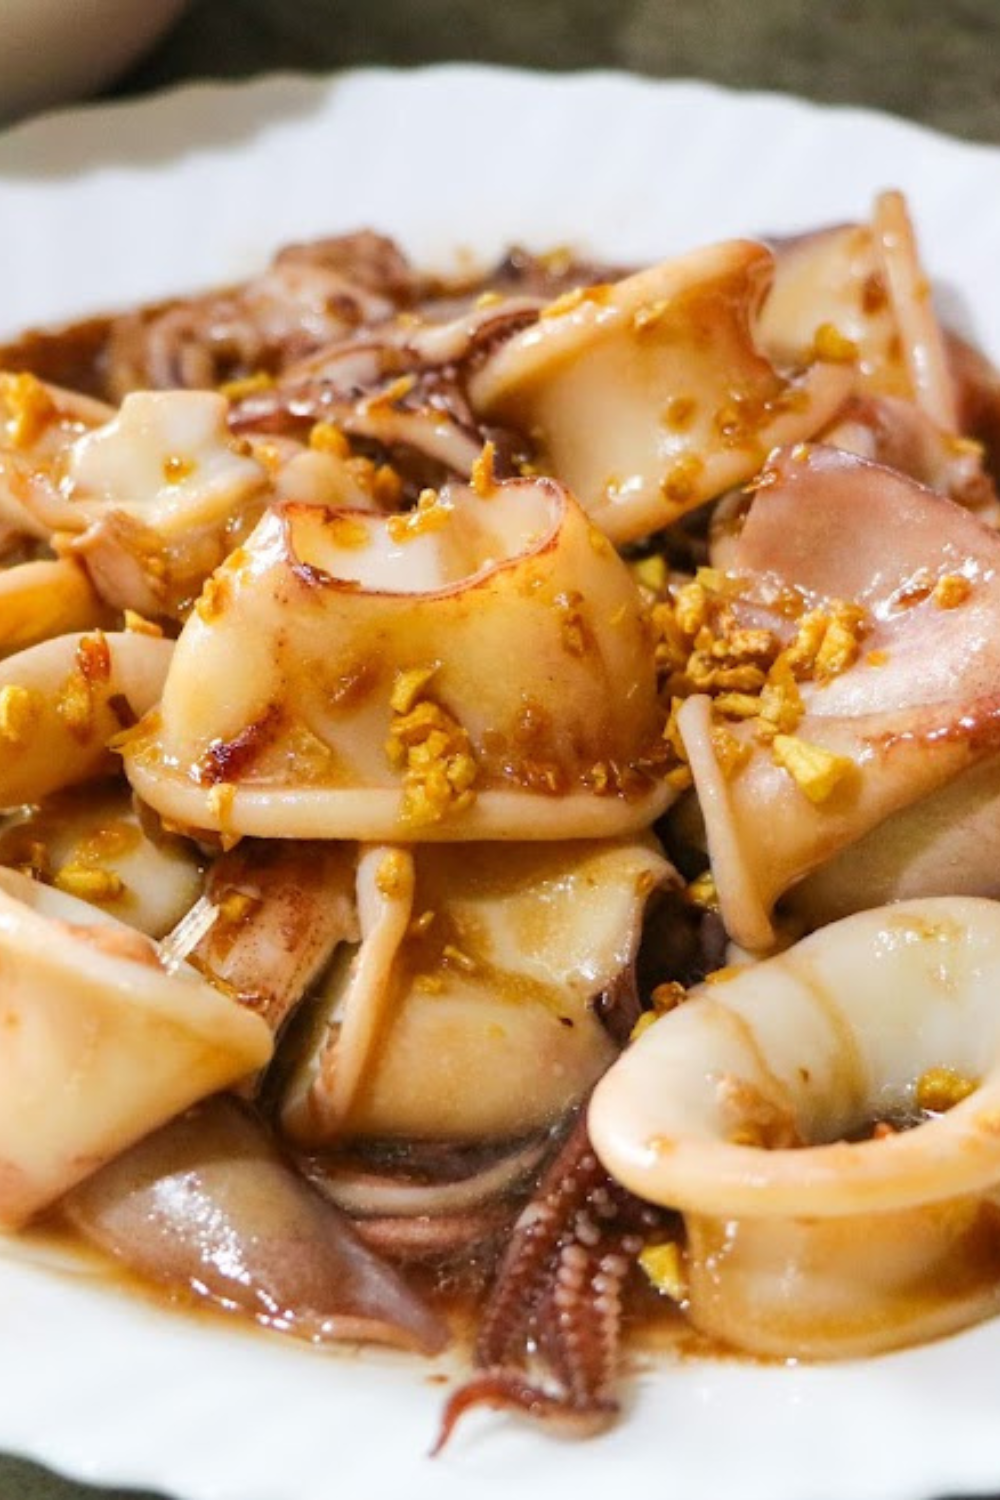 Stir fried squid with oyster sauce